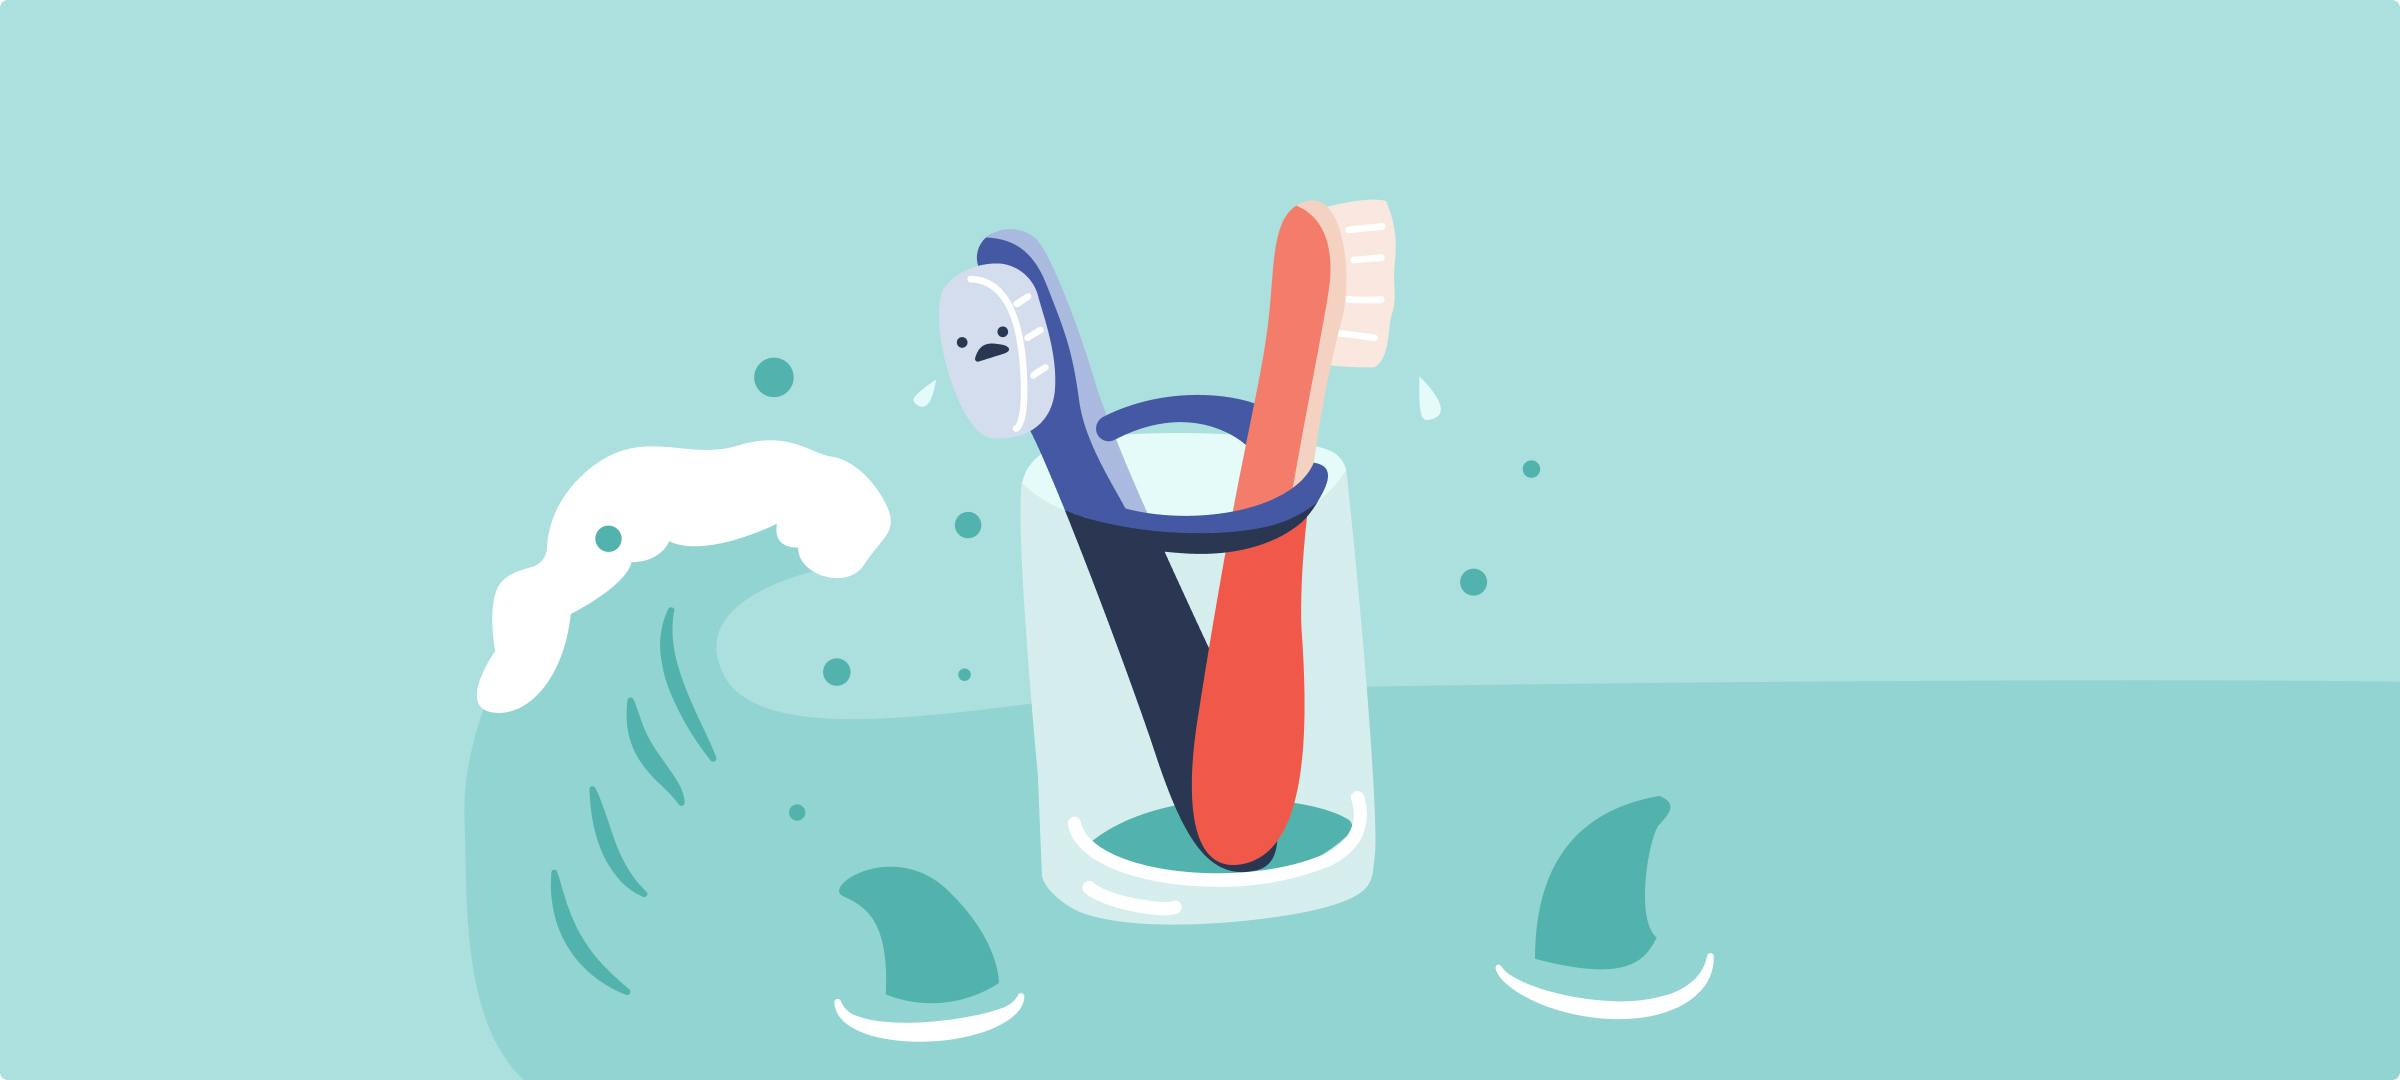 A big wave and sharks threatening two toothbrushes inside a glass